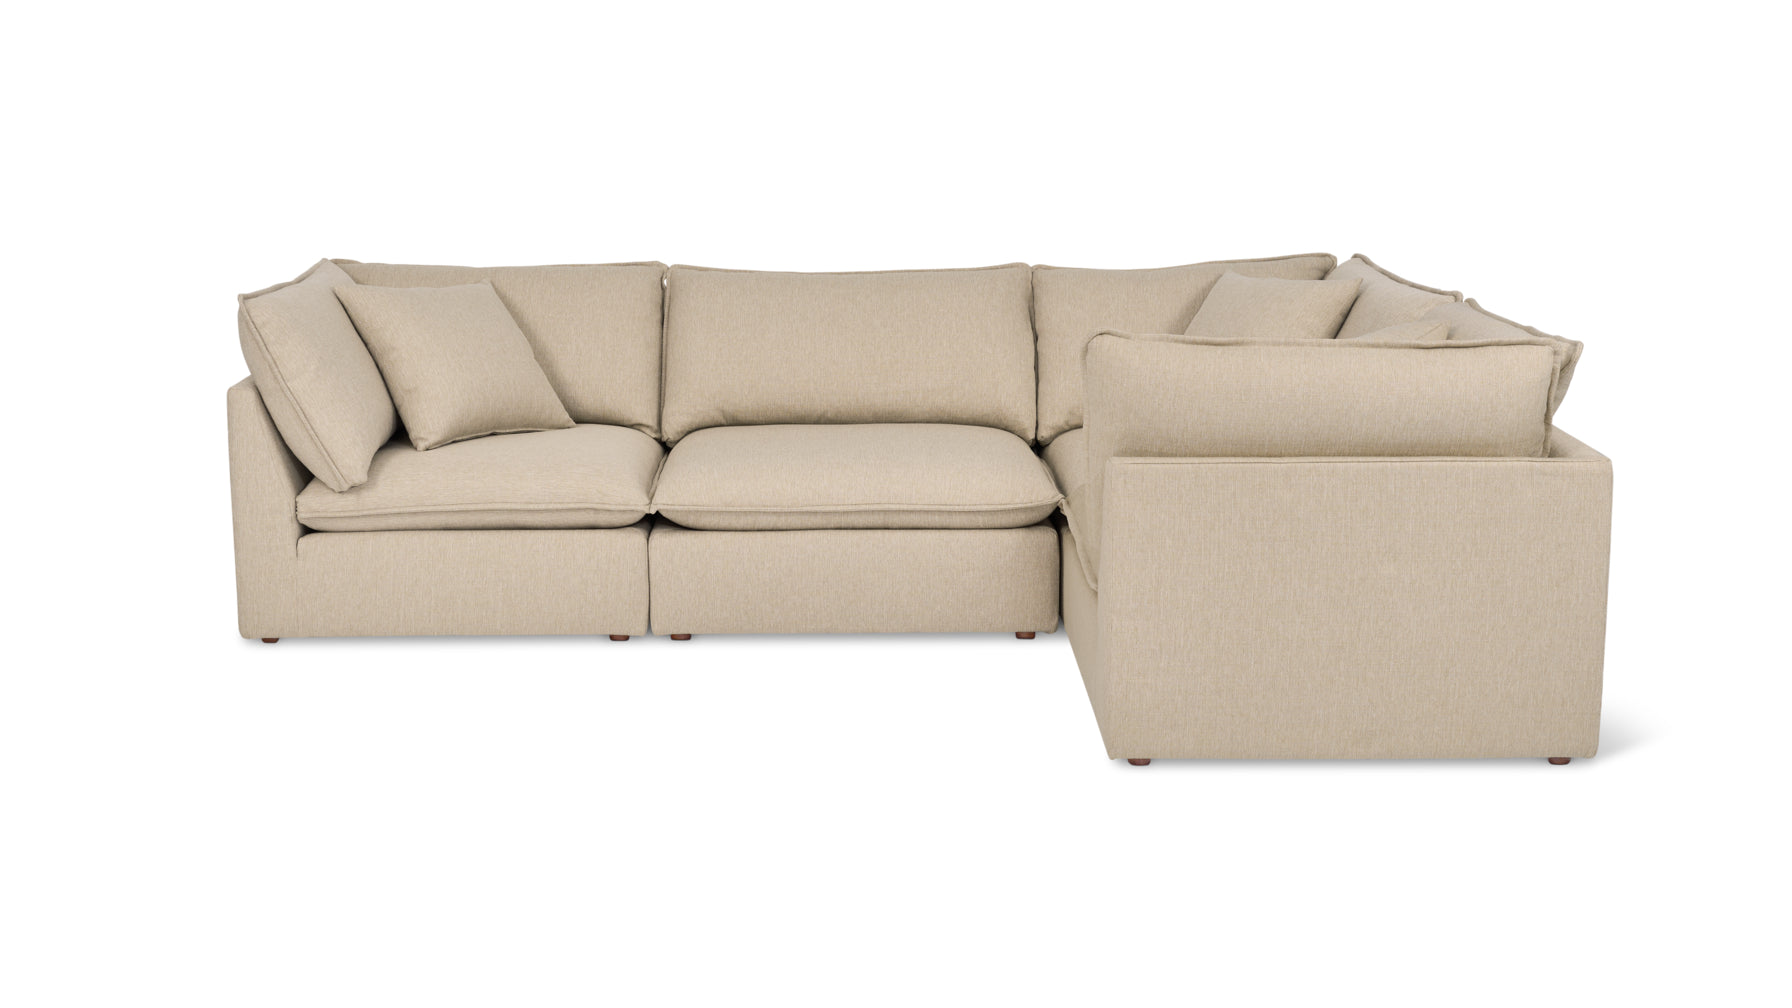 Chill Time 4-Piece Modular Sectional Closed, Biscuit - Image 1